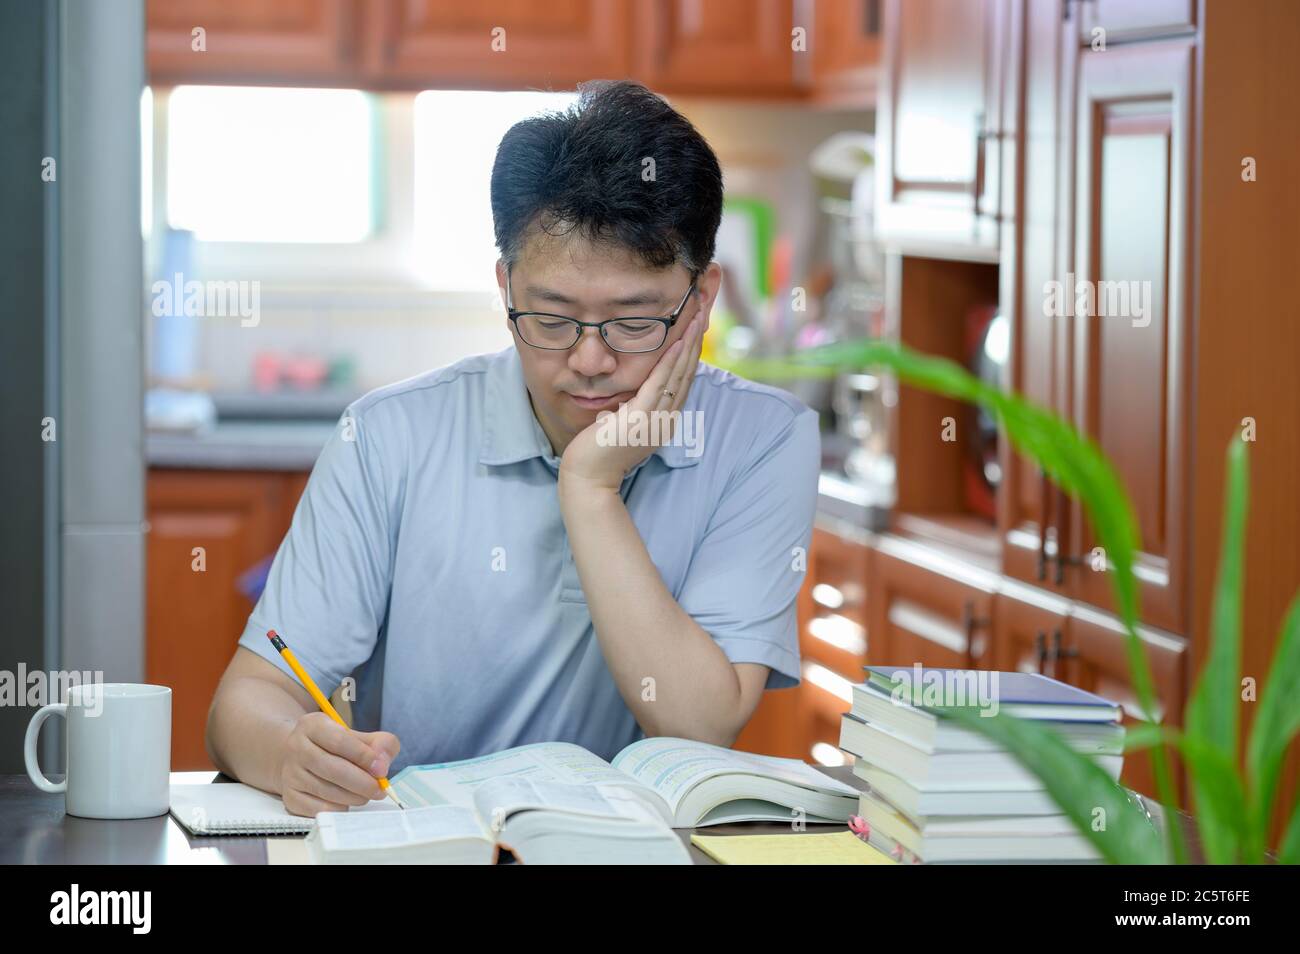 Asian middle-aged man sitting at desk at home, reading a book and studying. Stock Photo